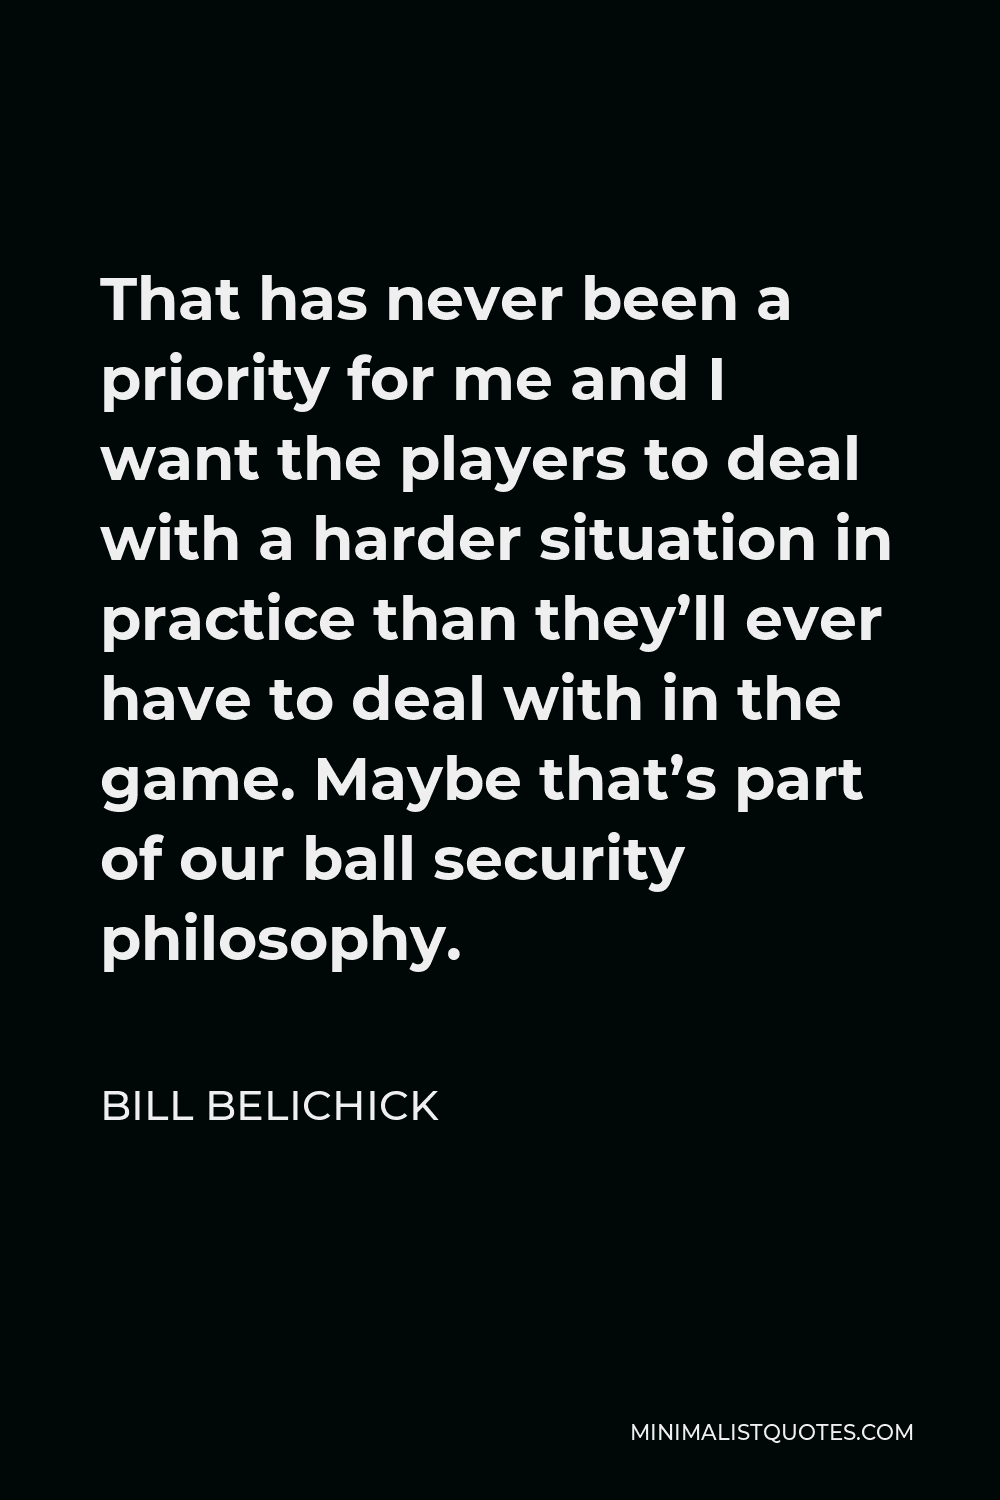 Bill Belichick Quote - That has never been a priority for me and I want the players to deal with a harder situation in practice than they’ll ever have to deal with in the game. Maybe that’s part of our ball security philosophy.